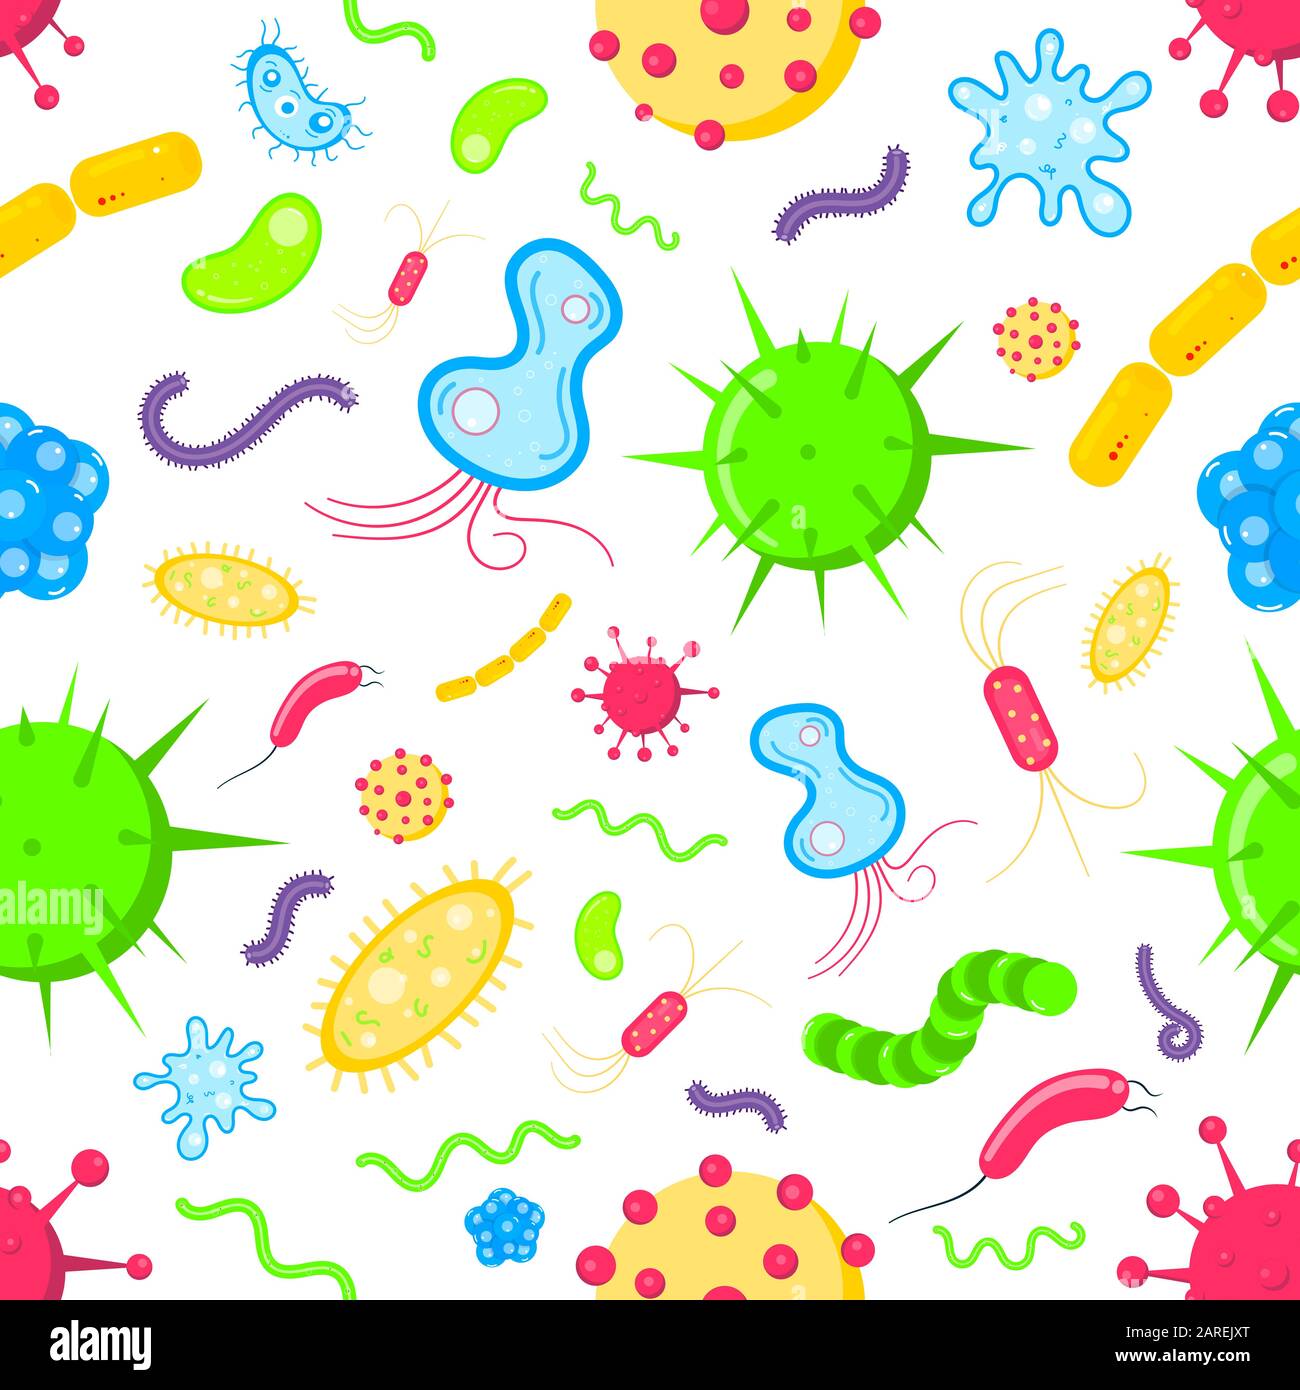 Bacterial microorganisms, germs and viruses colorful seamless pattern. Viruses, infections colorful, micro-organisms disease objects, cell cancer vect Stock Vector